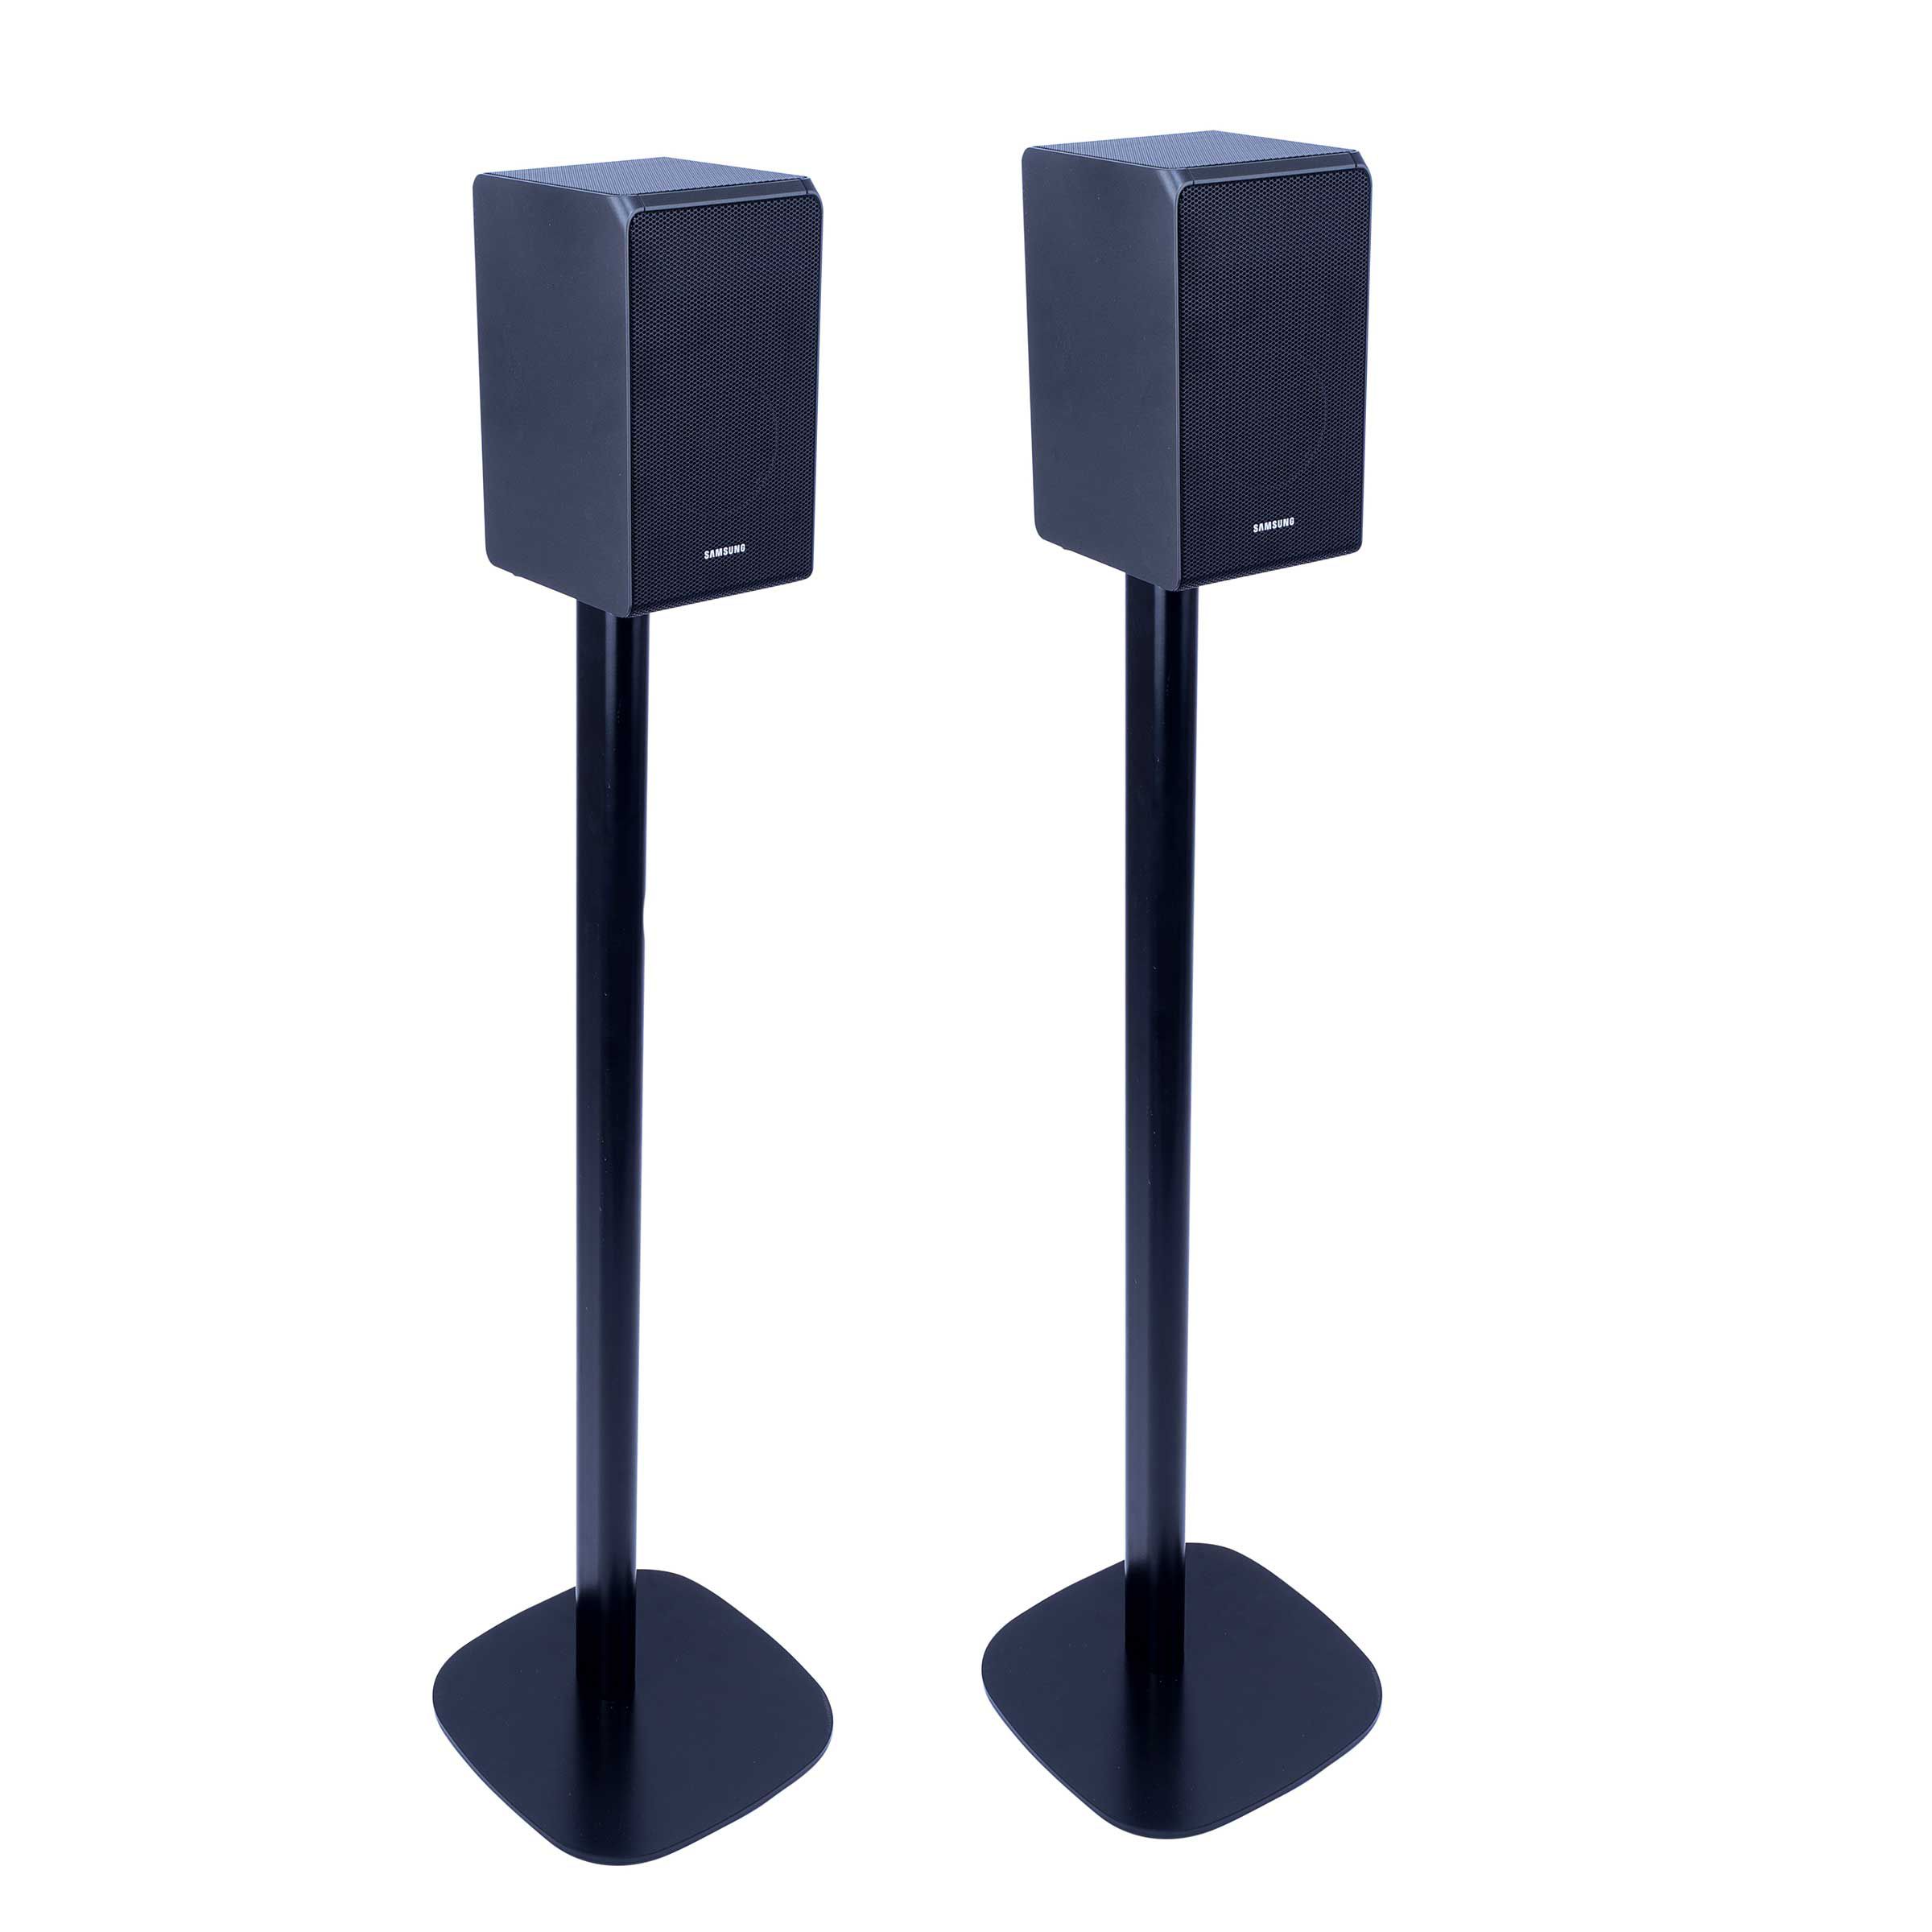 Vebos stand black set | The floor stand for Samsung HW-Q90R